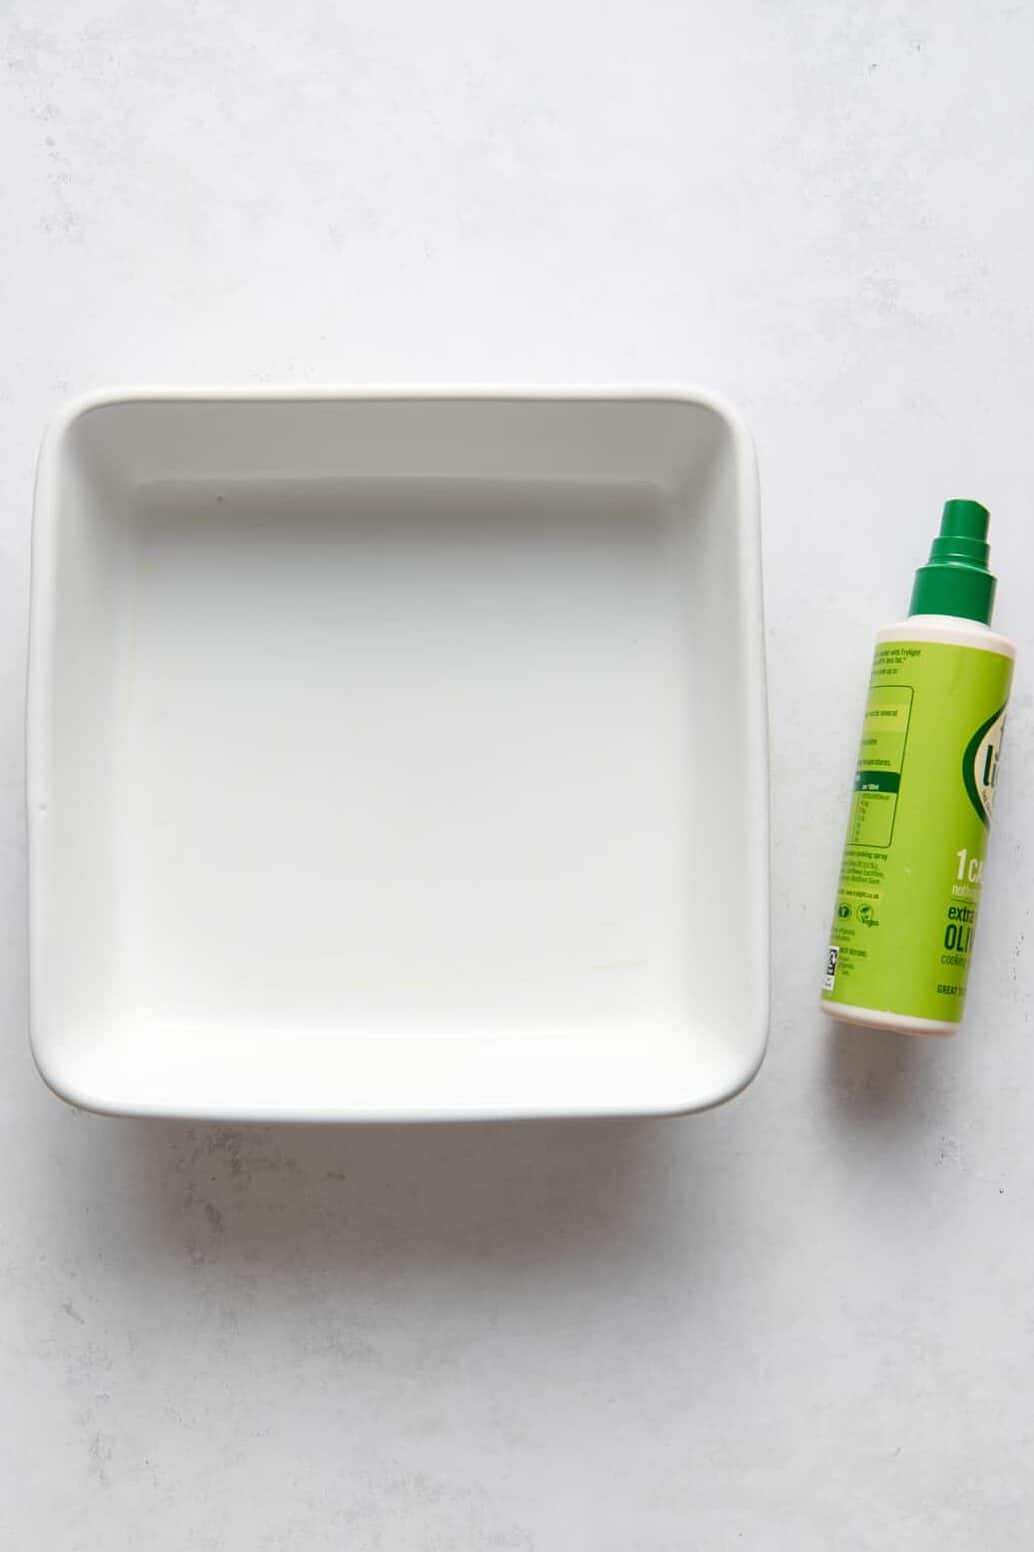 8x8 ceramic baking dish with nonstick spray on the side